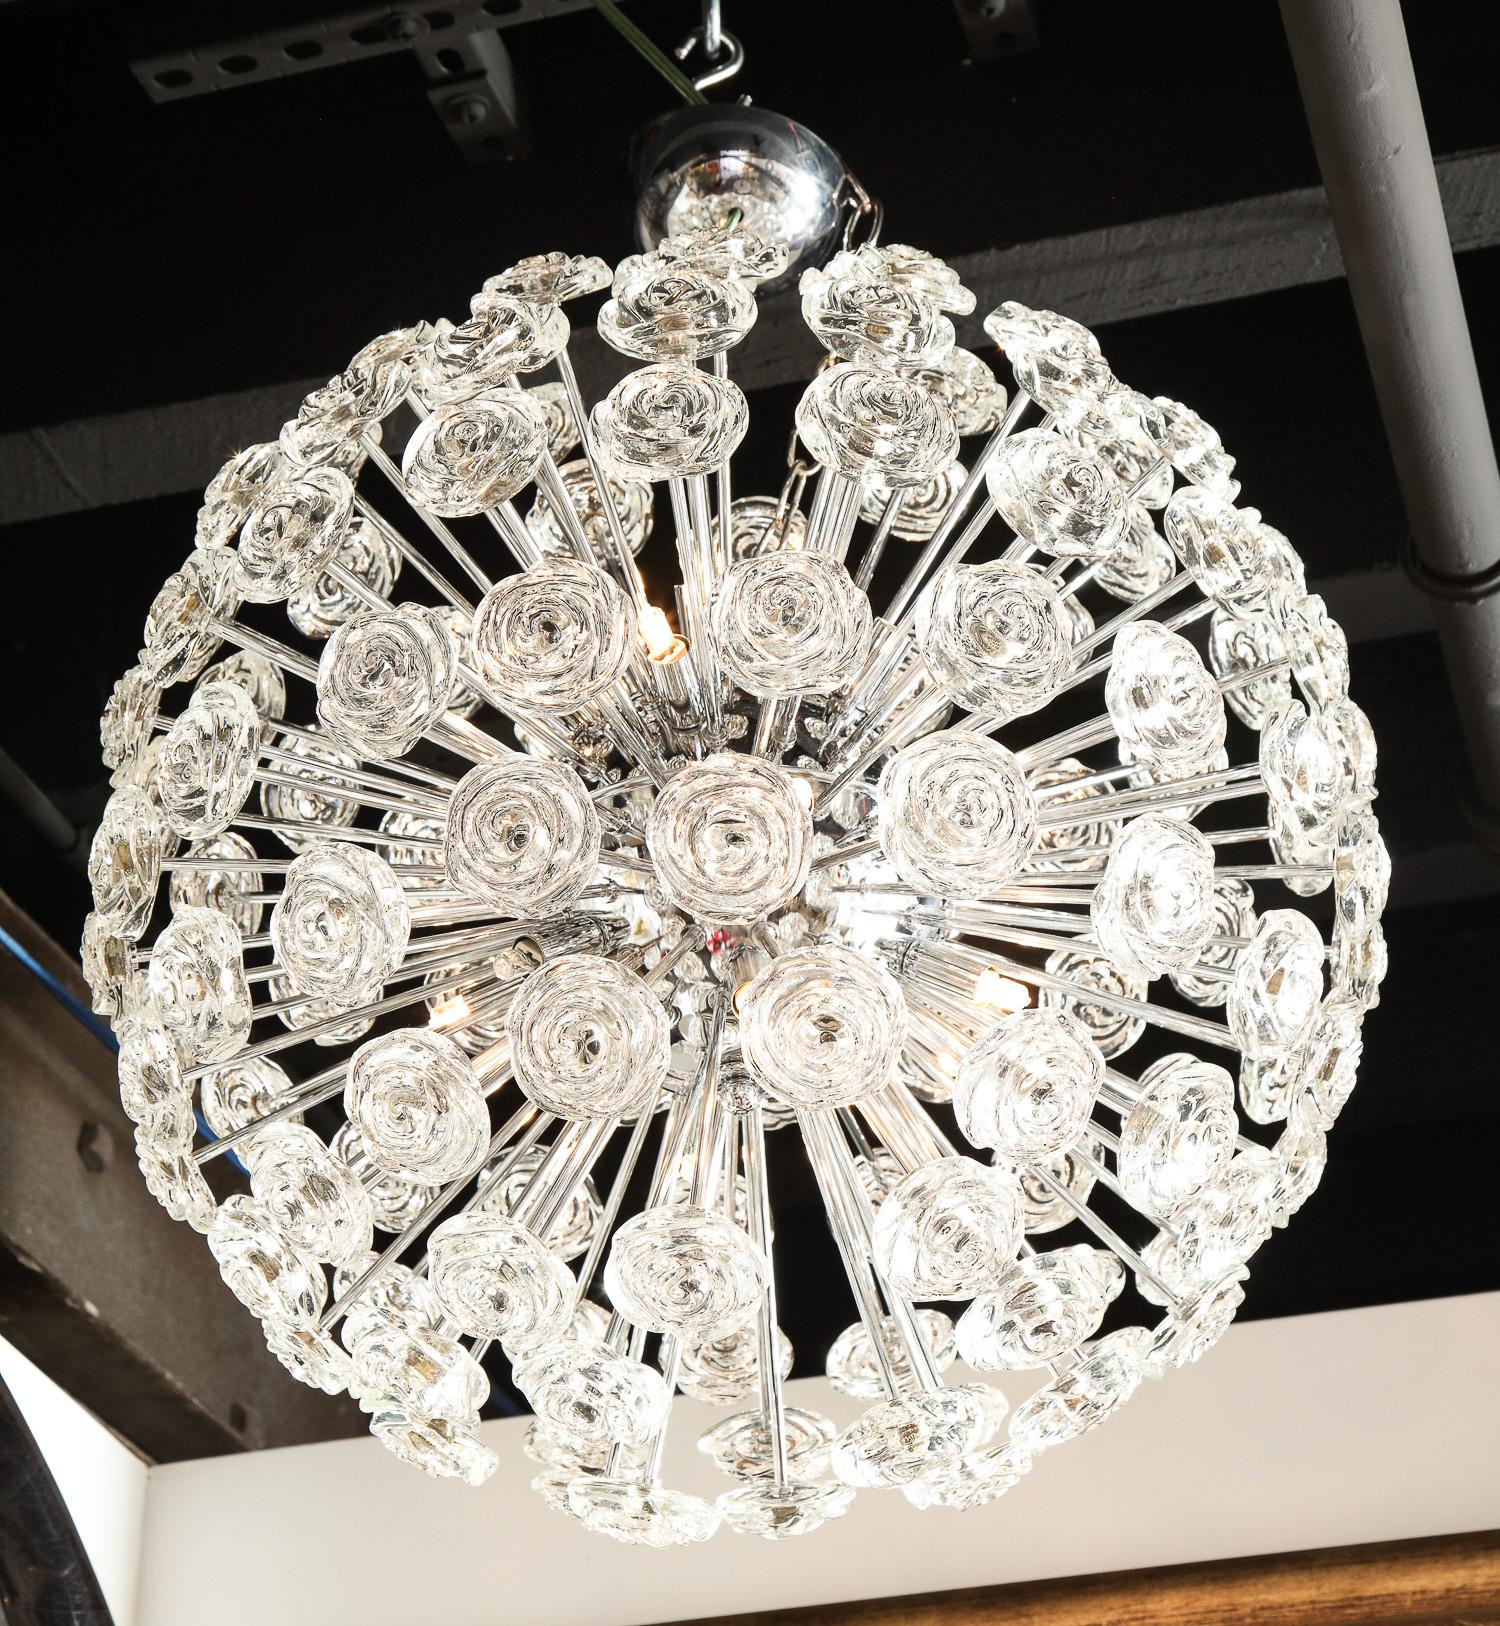 Decorative chrome, midcentury style chandelier with roses made of glass. Murano, Italy.
This chandelier is very elegant. It brings a lot of light into your room. The chandelier has many halogen lights.